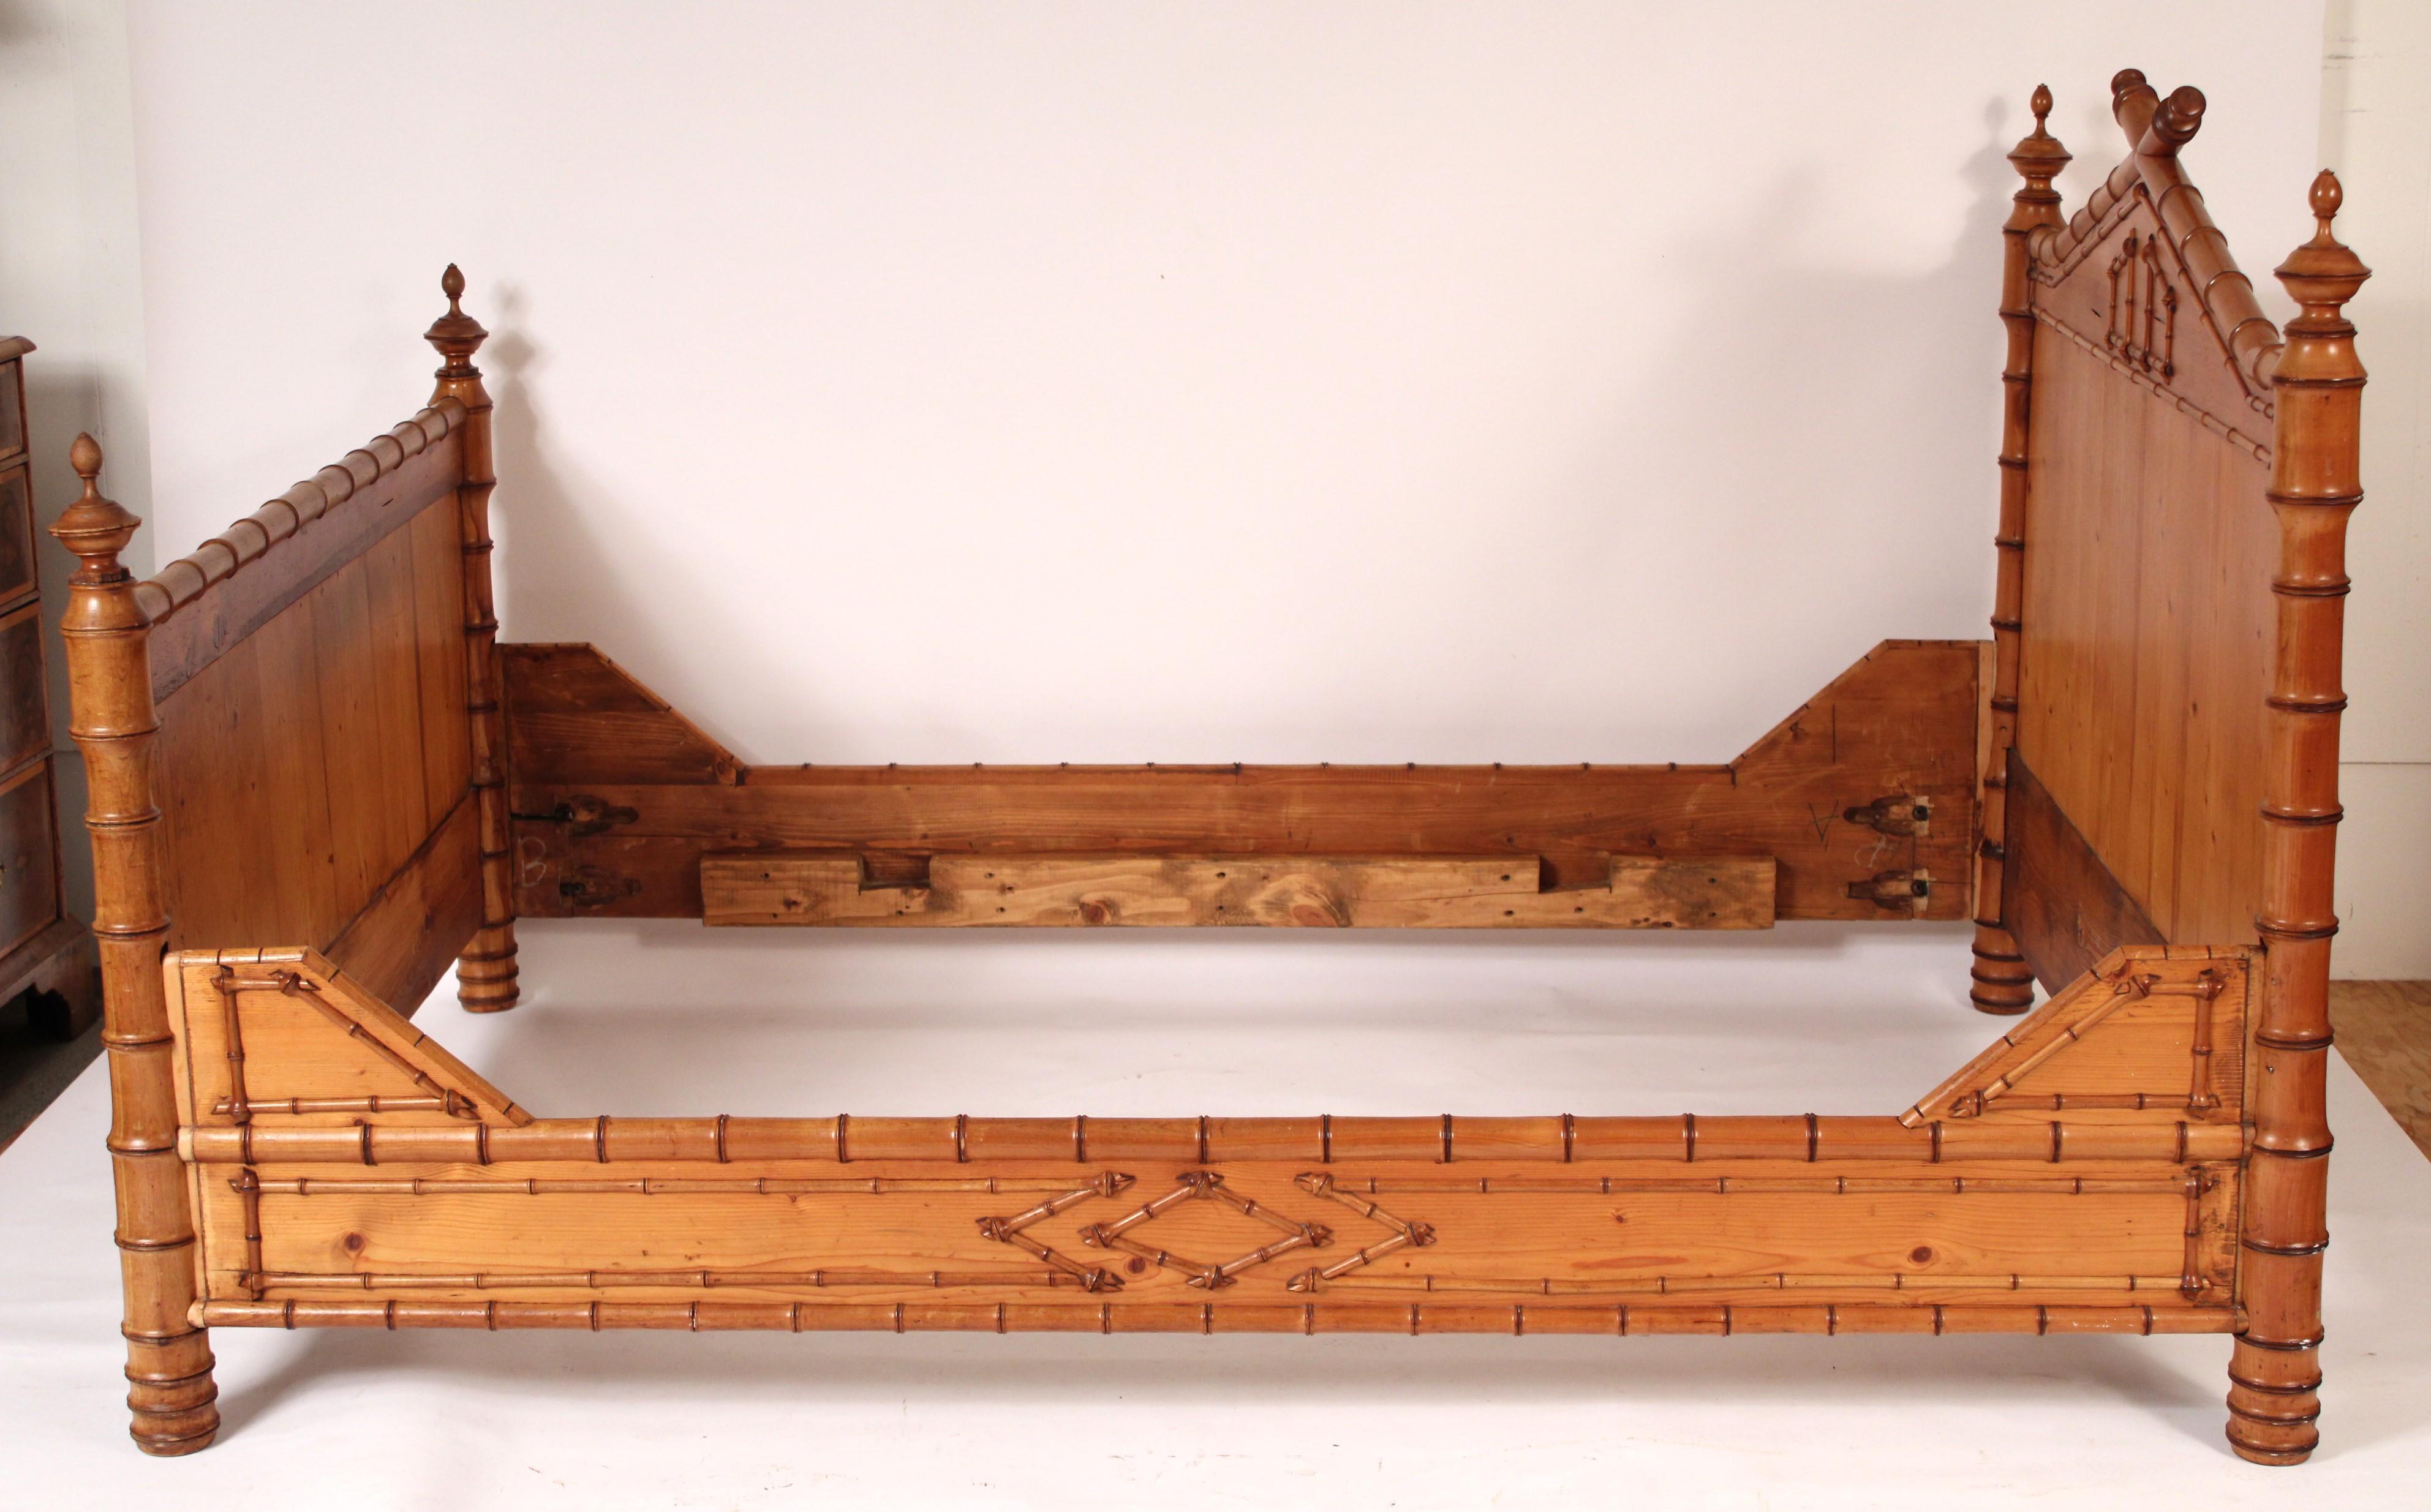 Early 20th Century Aesthetic Movement Pine and Birch Bedframe For Sale